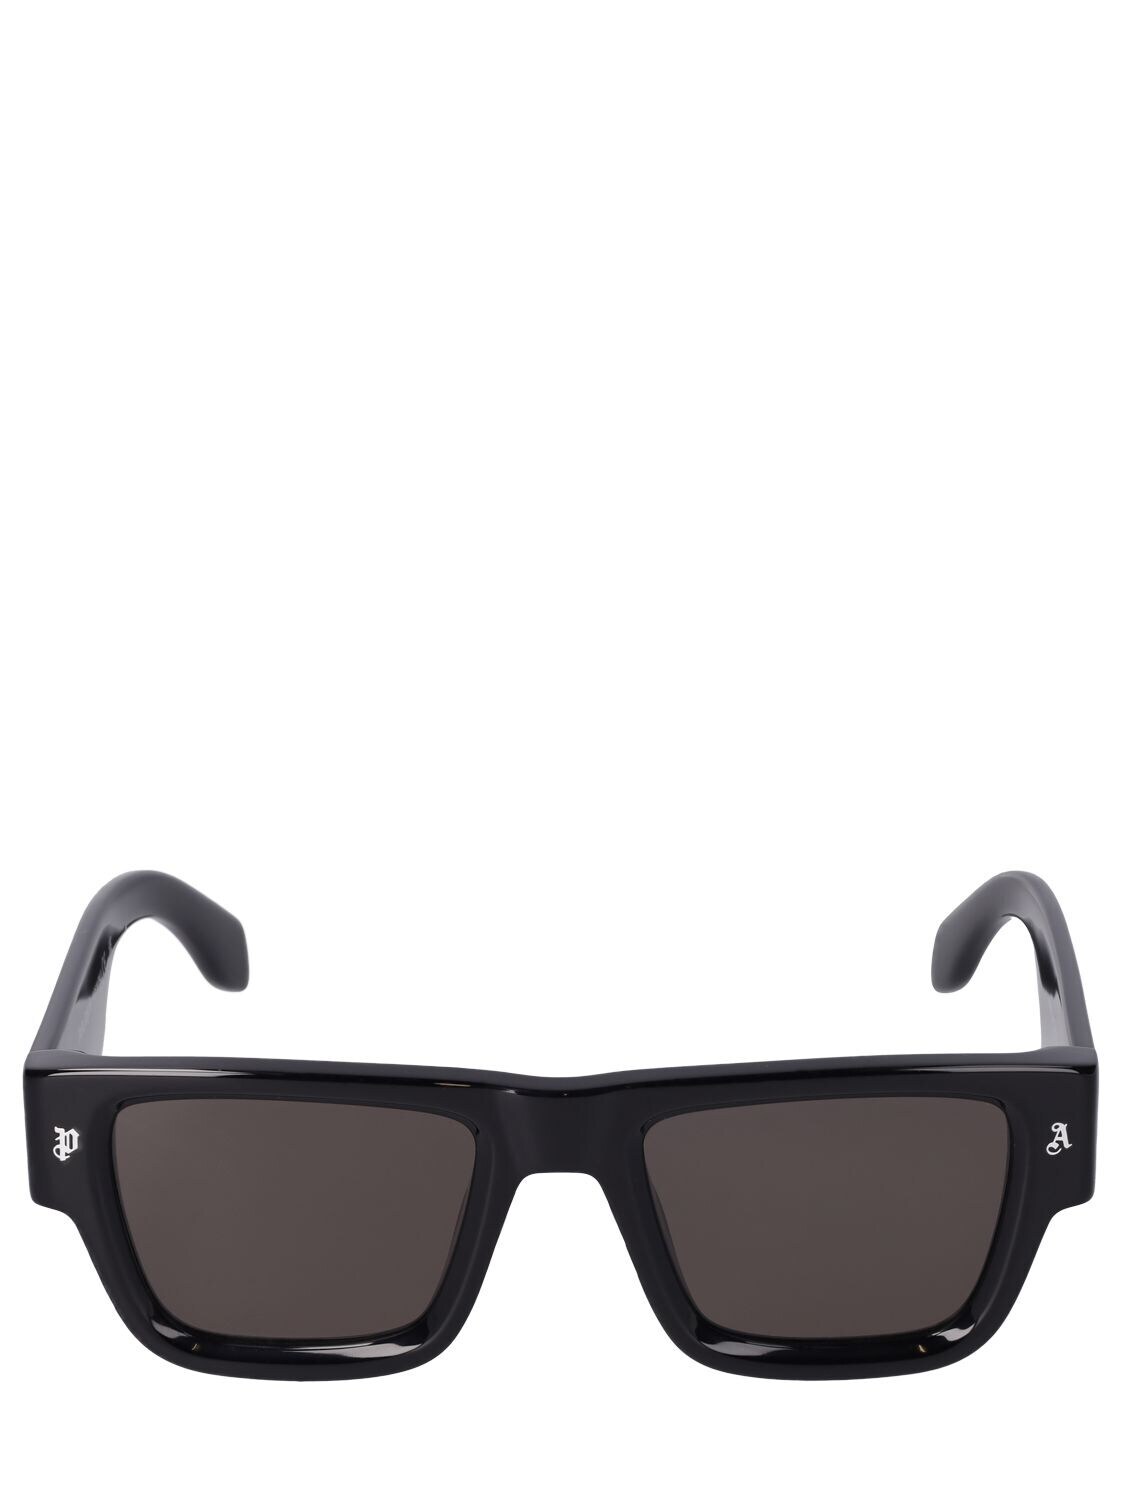 PALM ANGELS Palisade Squared Acetate Sunglasses in black / grey